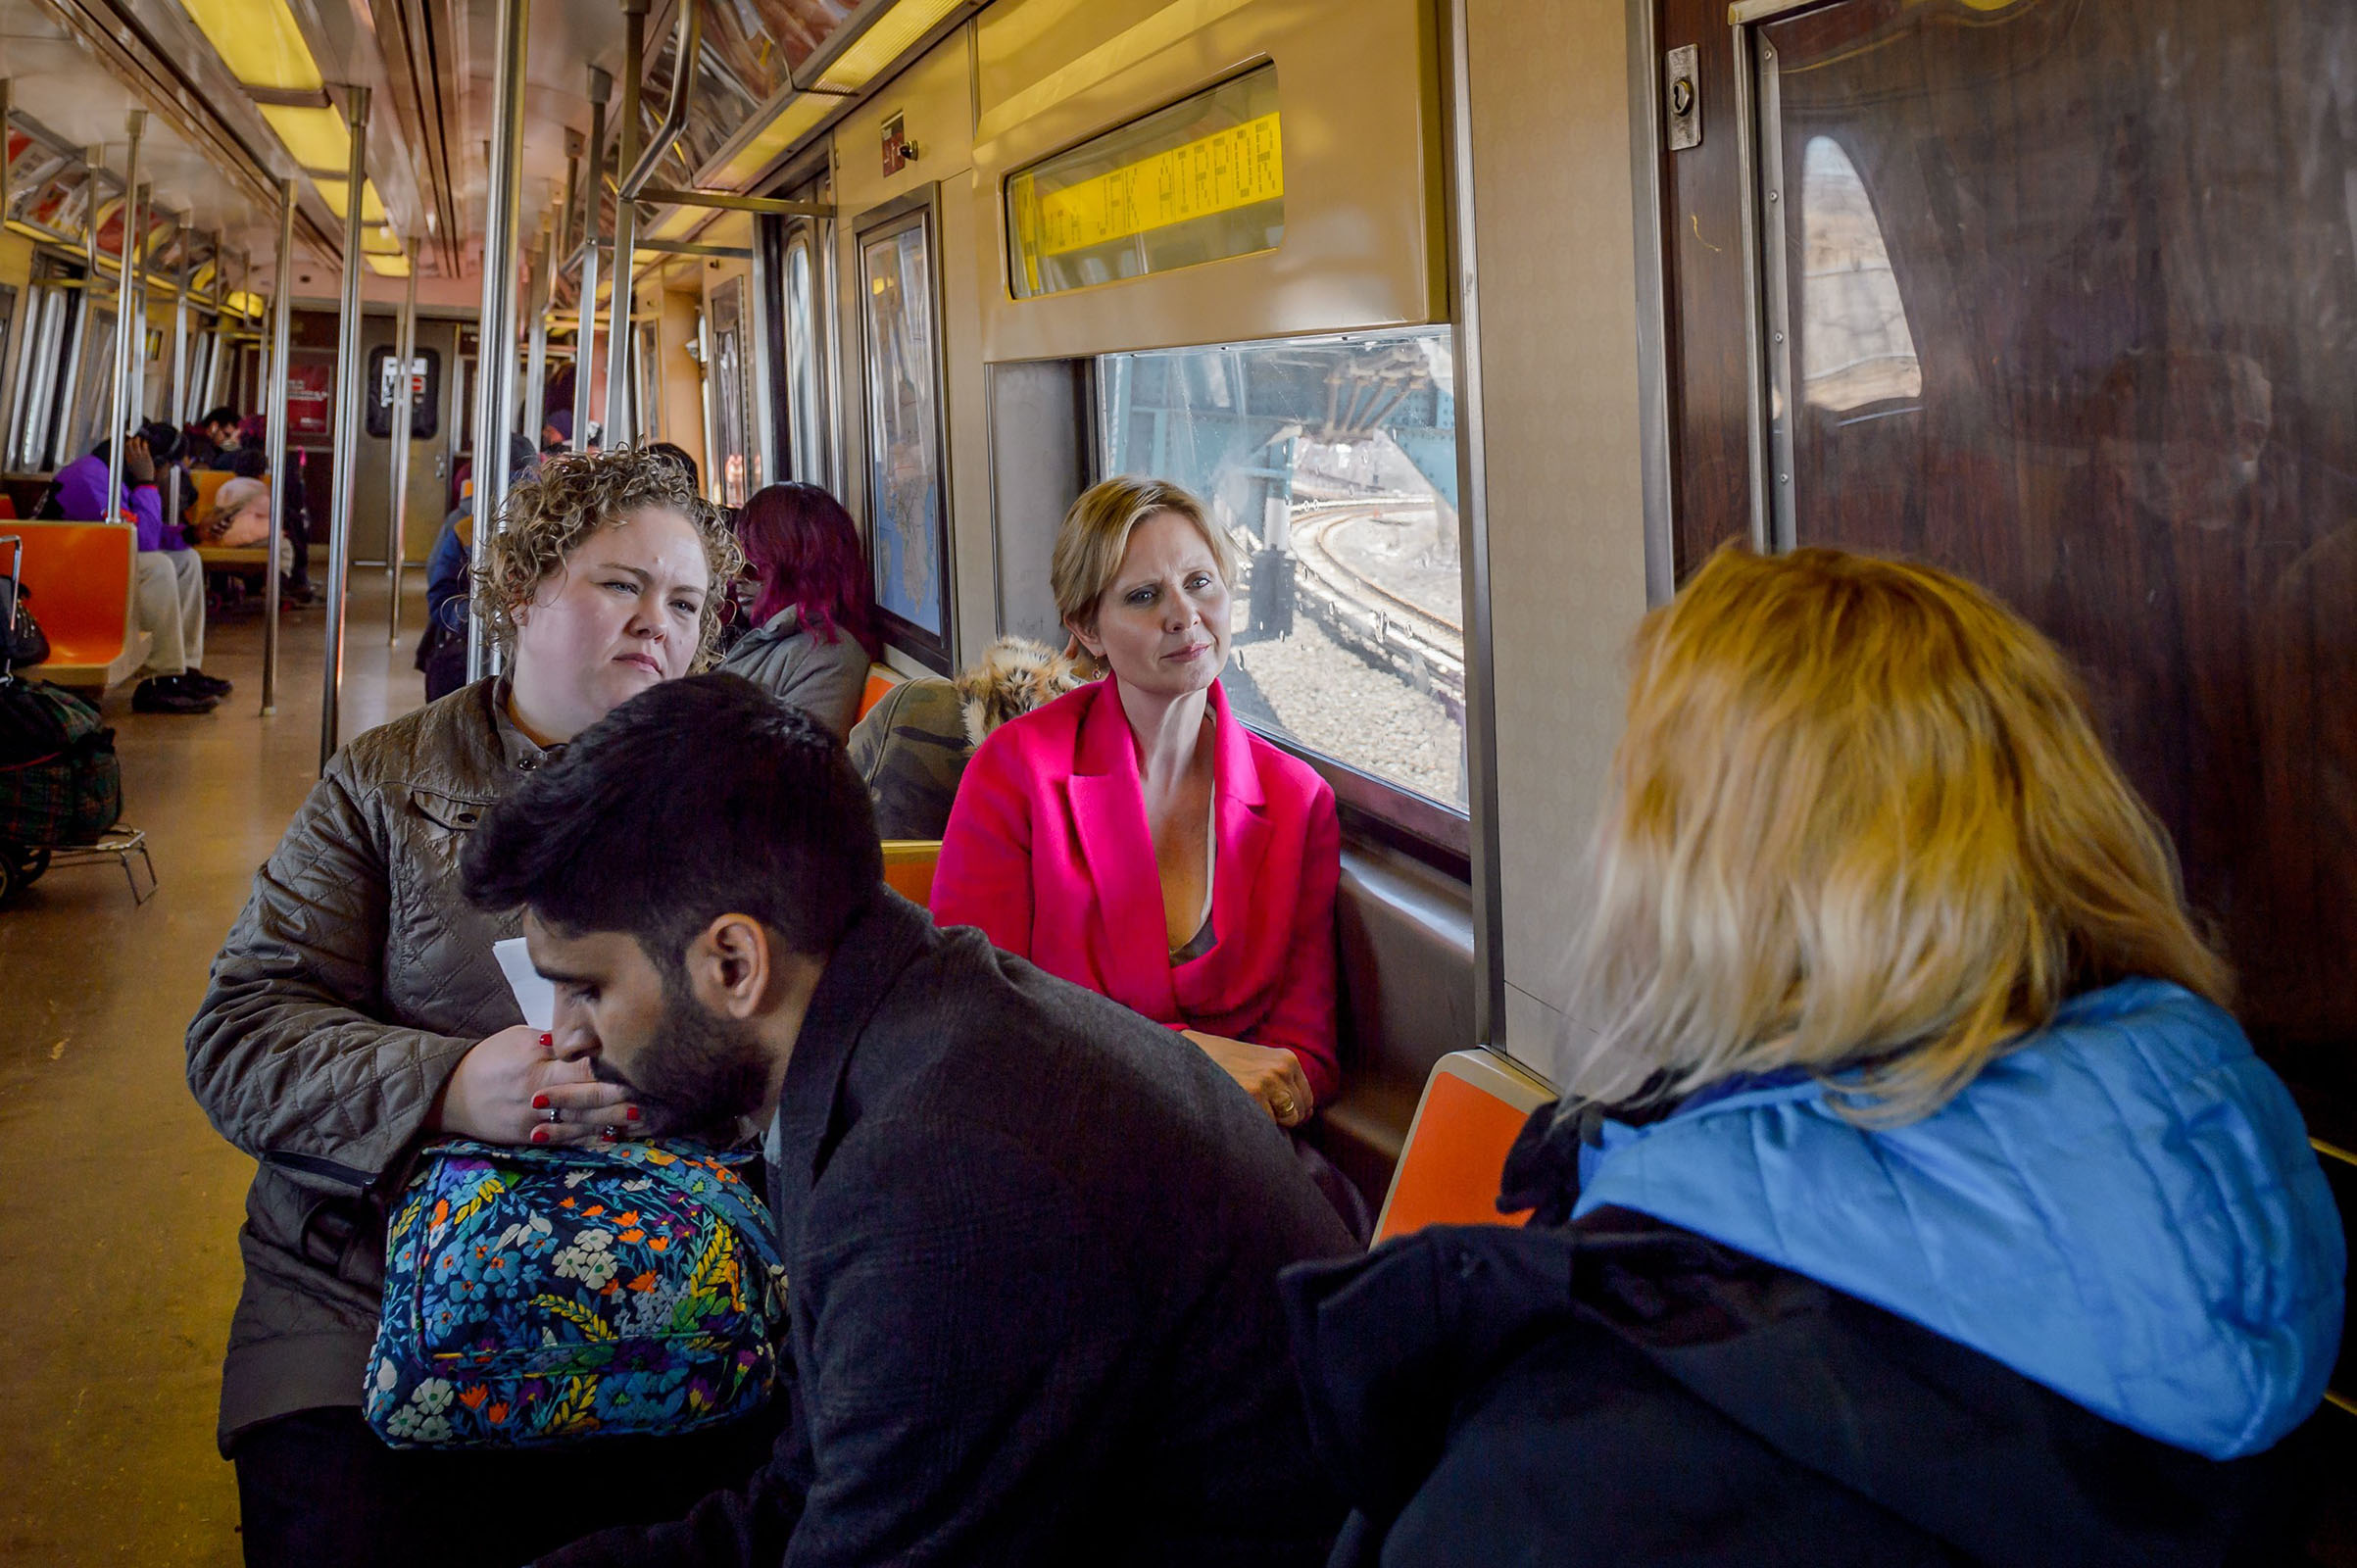 Cynthia Nixon, a lifelong New Yorker, actor, progressive advocate and candidate running for governor takes the subway to the Rockaways on April 20, 2018. (Erik McGregor—Sipa USA)